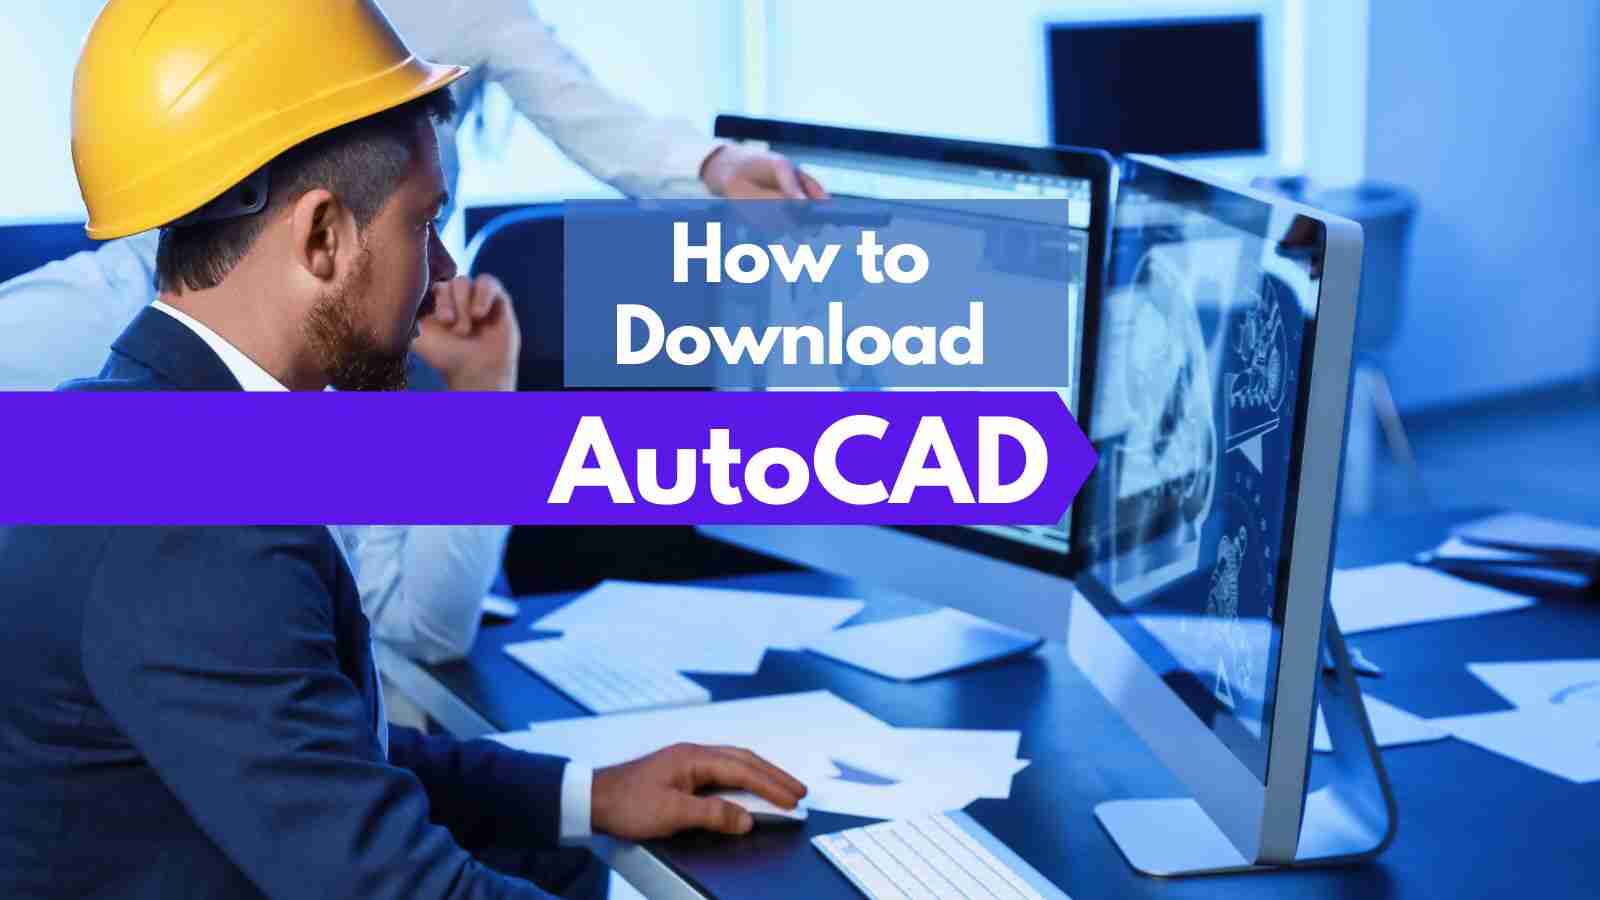 autocad free download for students and educators